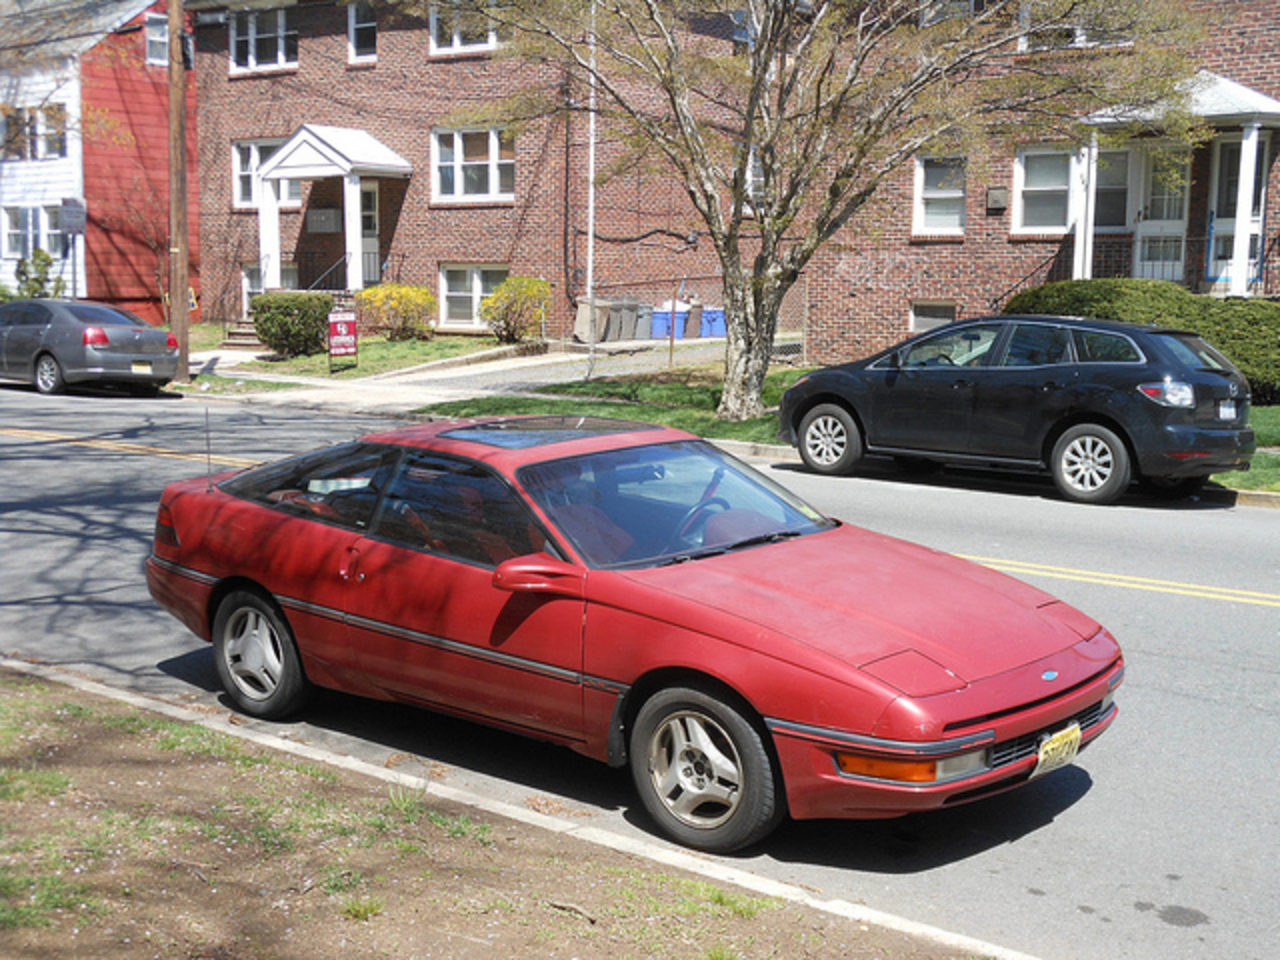 Red Ford Probe | Flickr - Photo Sharing!